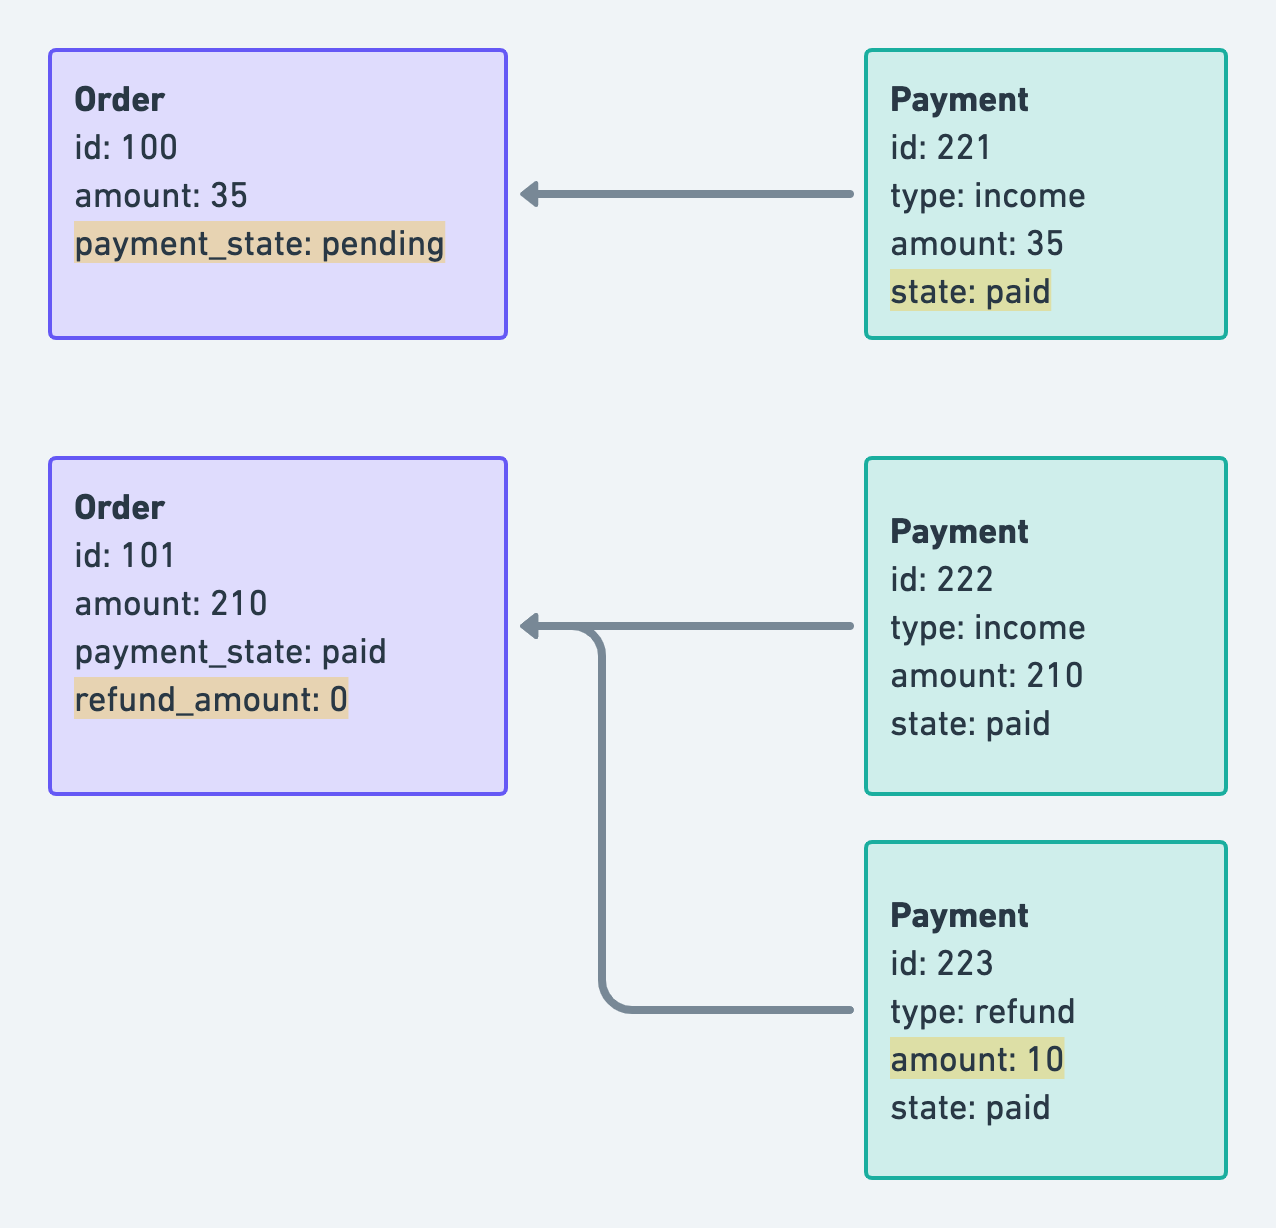 payment_state and refund_amount are not same